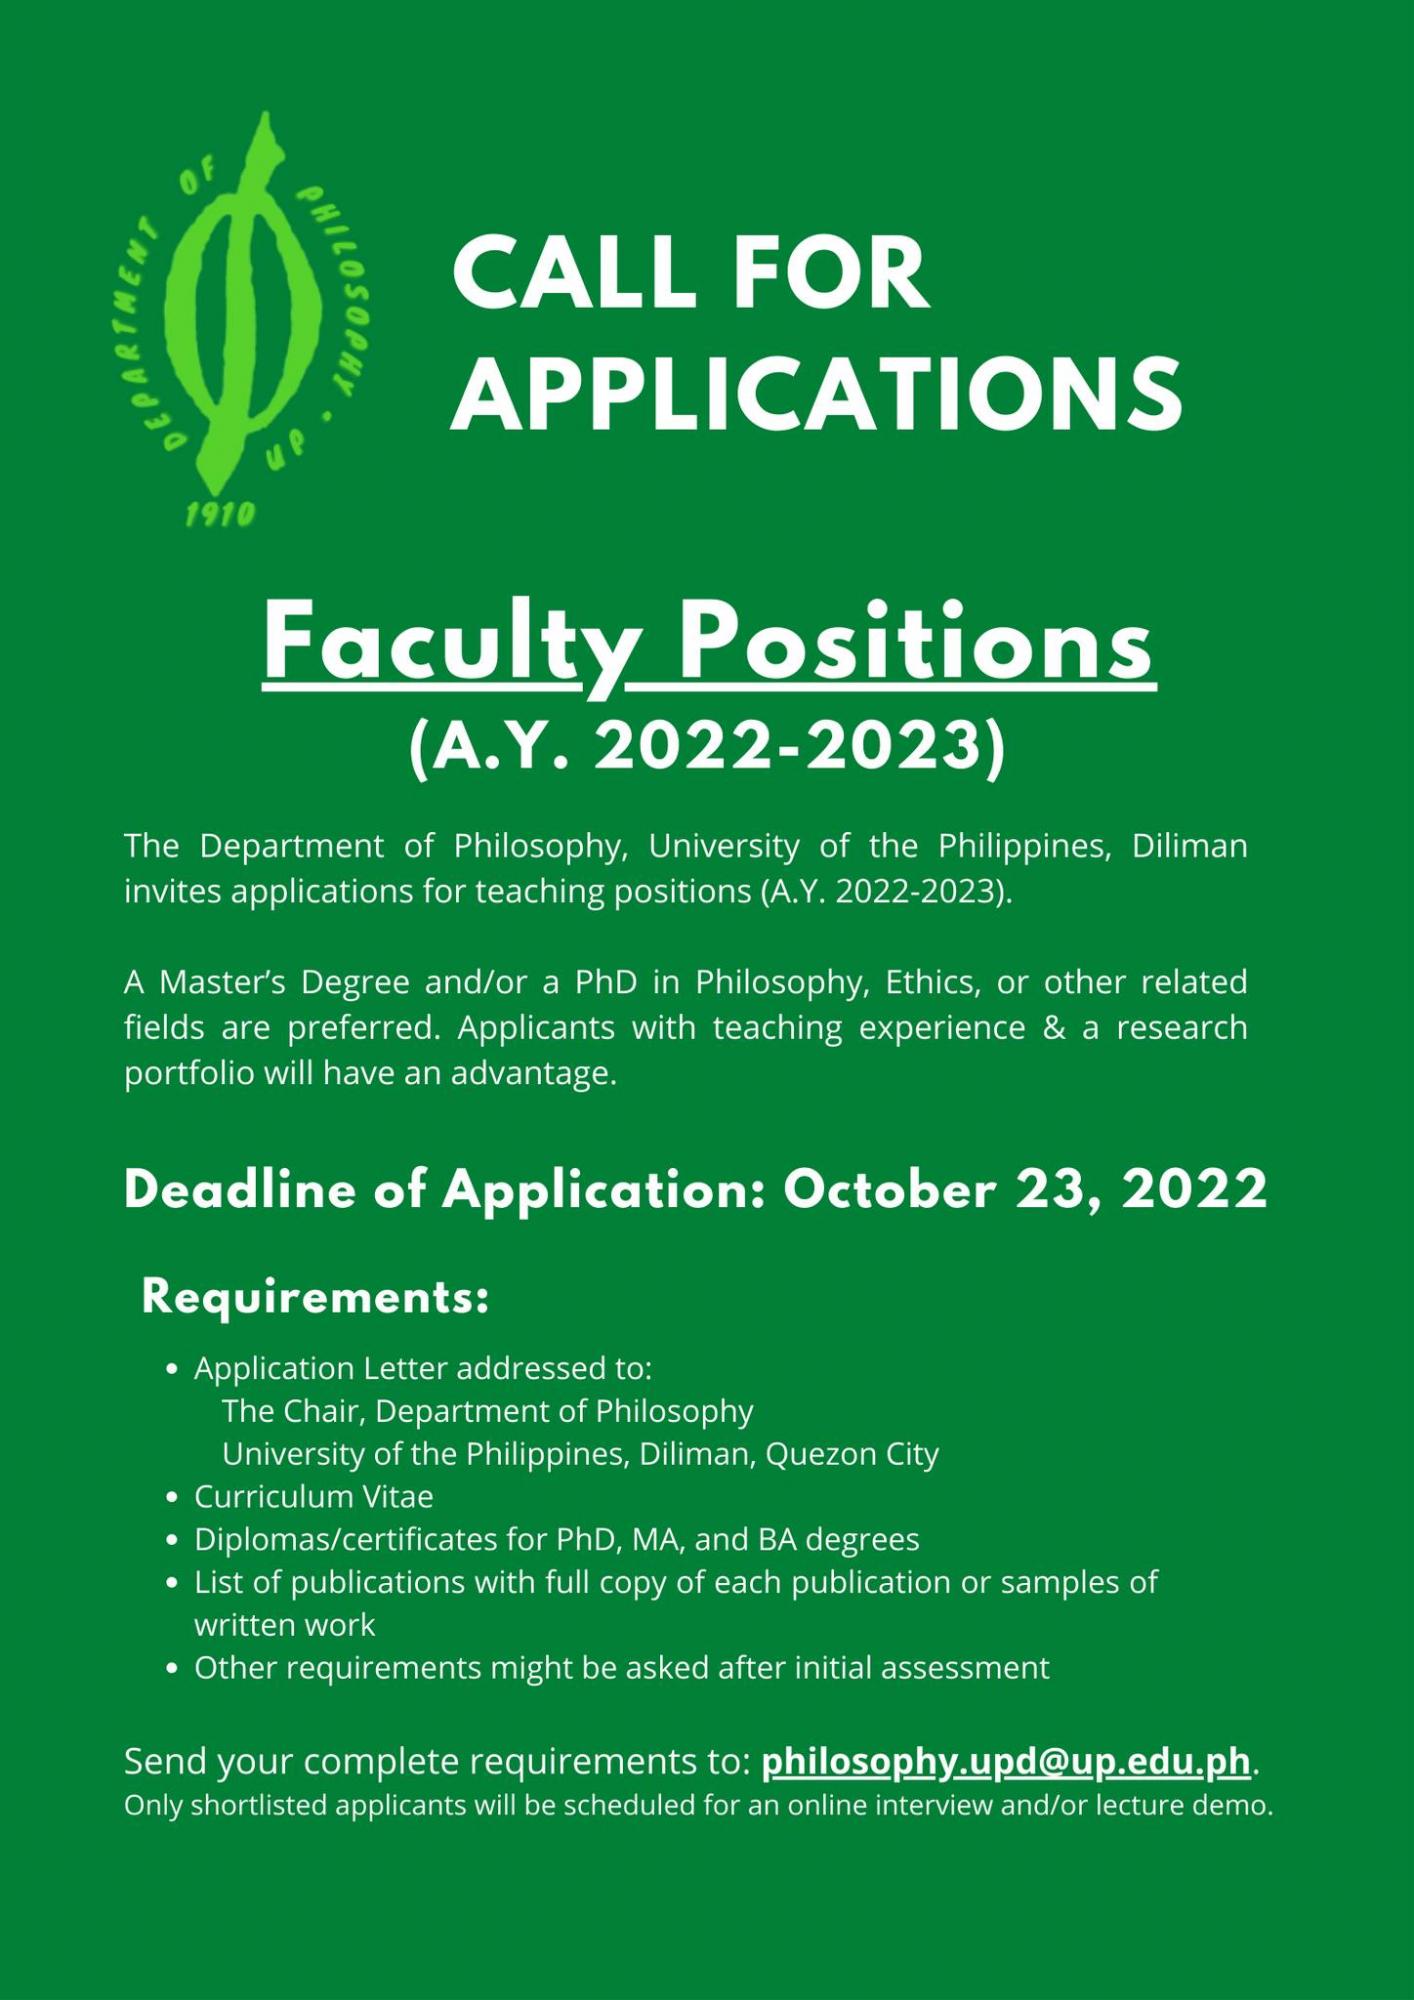 Call for Faculty Applications First Sem AY 2022-2023